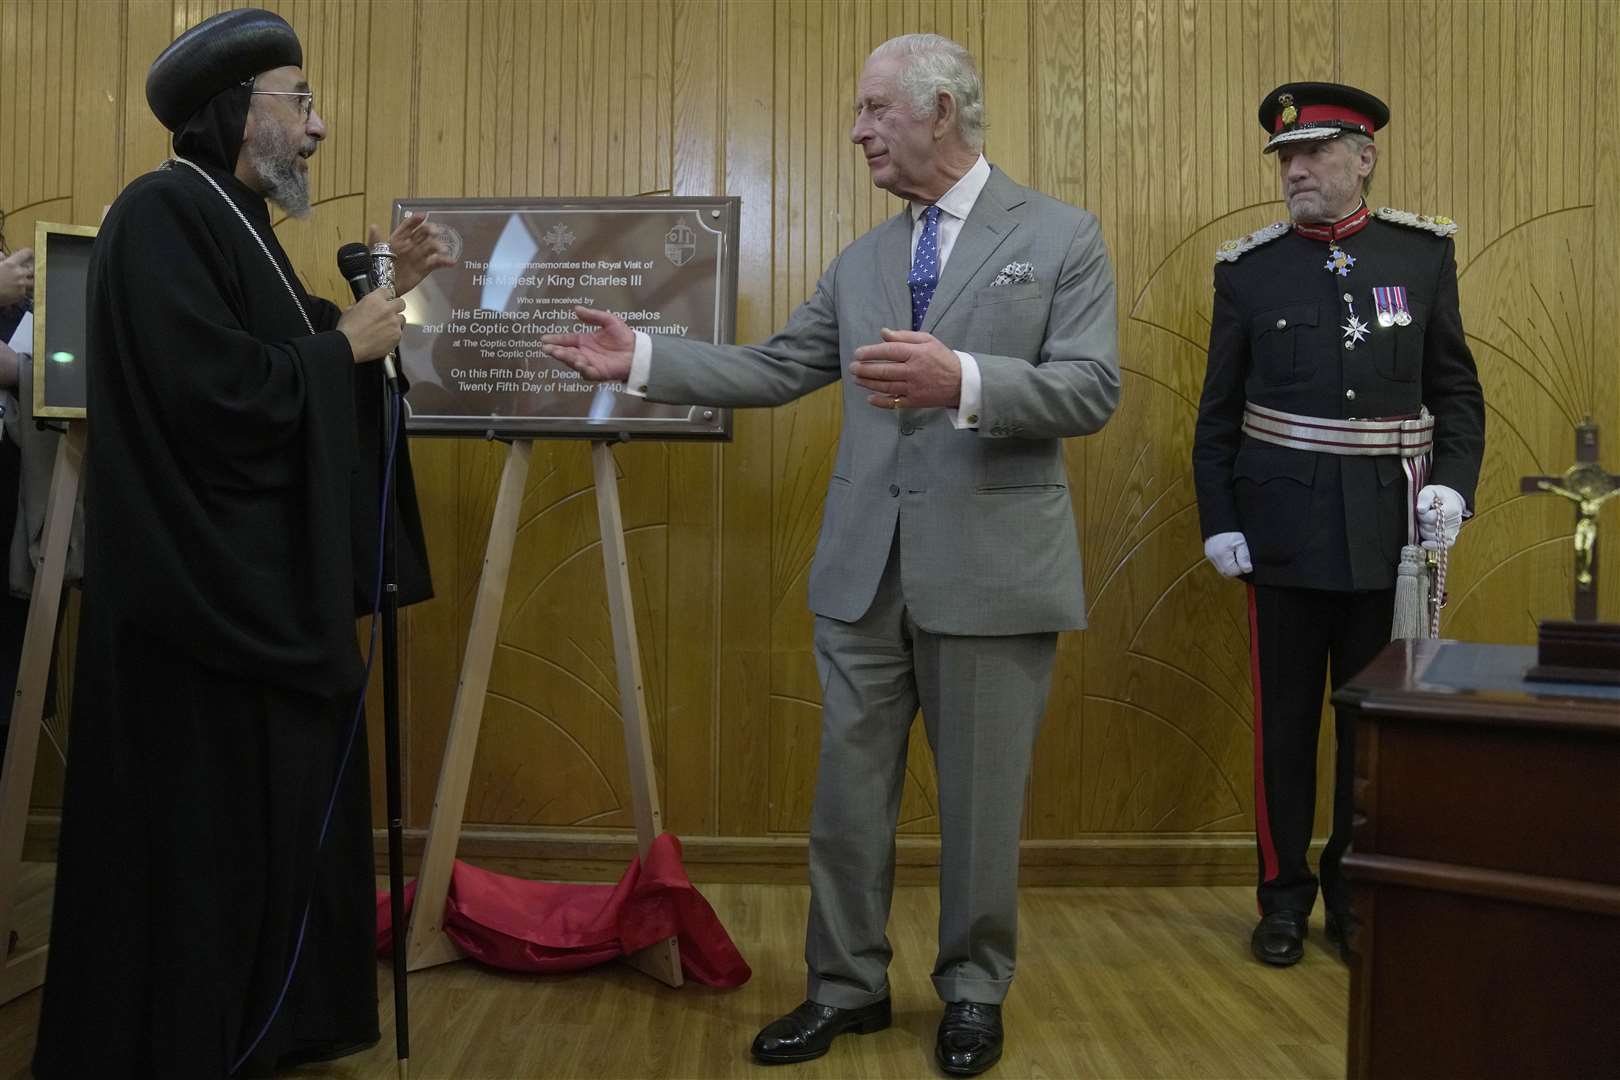 The King and Archbishop Angaelos unveiled a plaque following the Advent service and Christmas reception at the Coptic Orthodox Church Centre UK (Kin Cheung/PA)